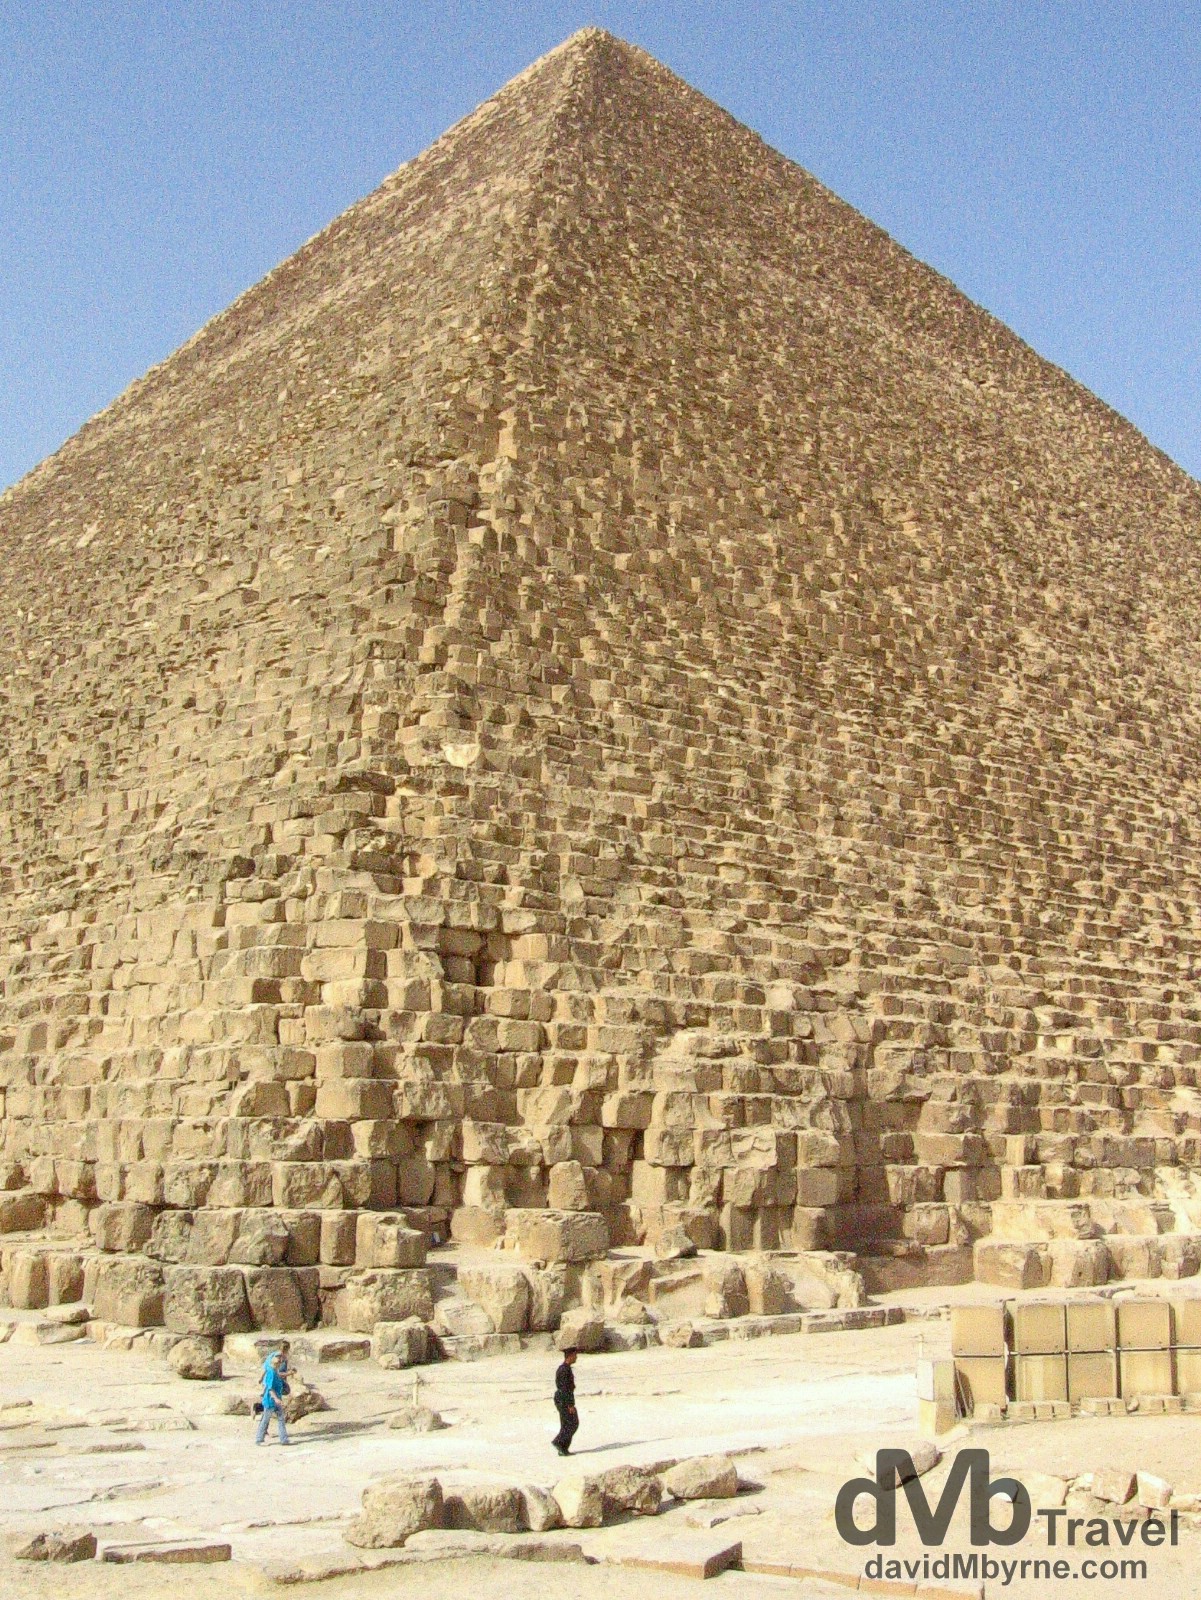 At the base of The Great Pyramid of Khufu on The Giza Plateau, Giza, Egypt. April 13, 2008.